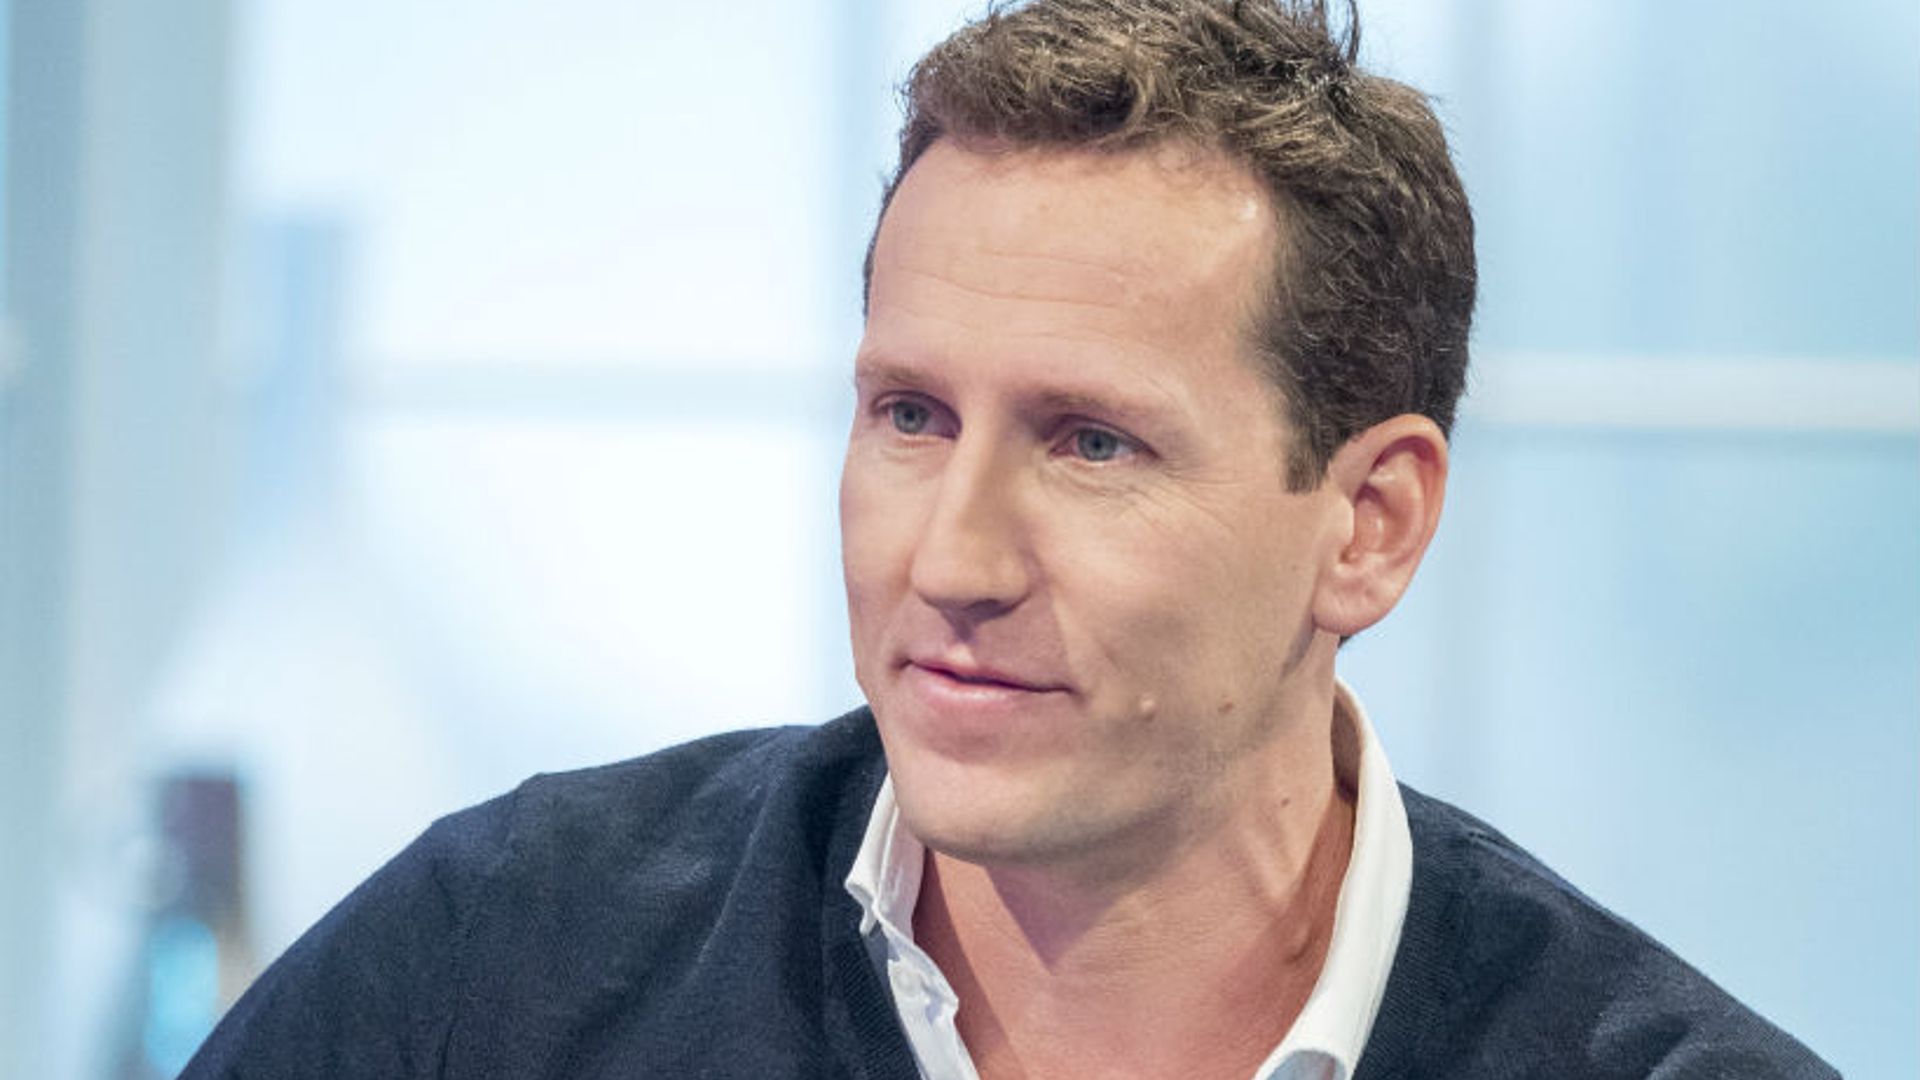 brendan cole strictly axe interview